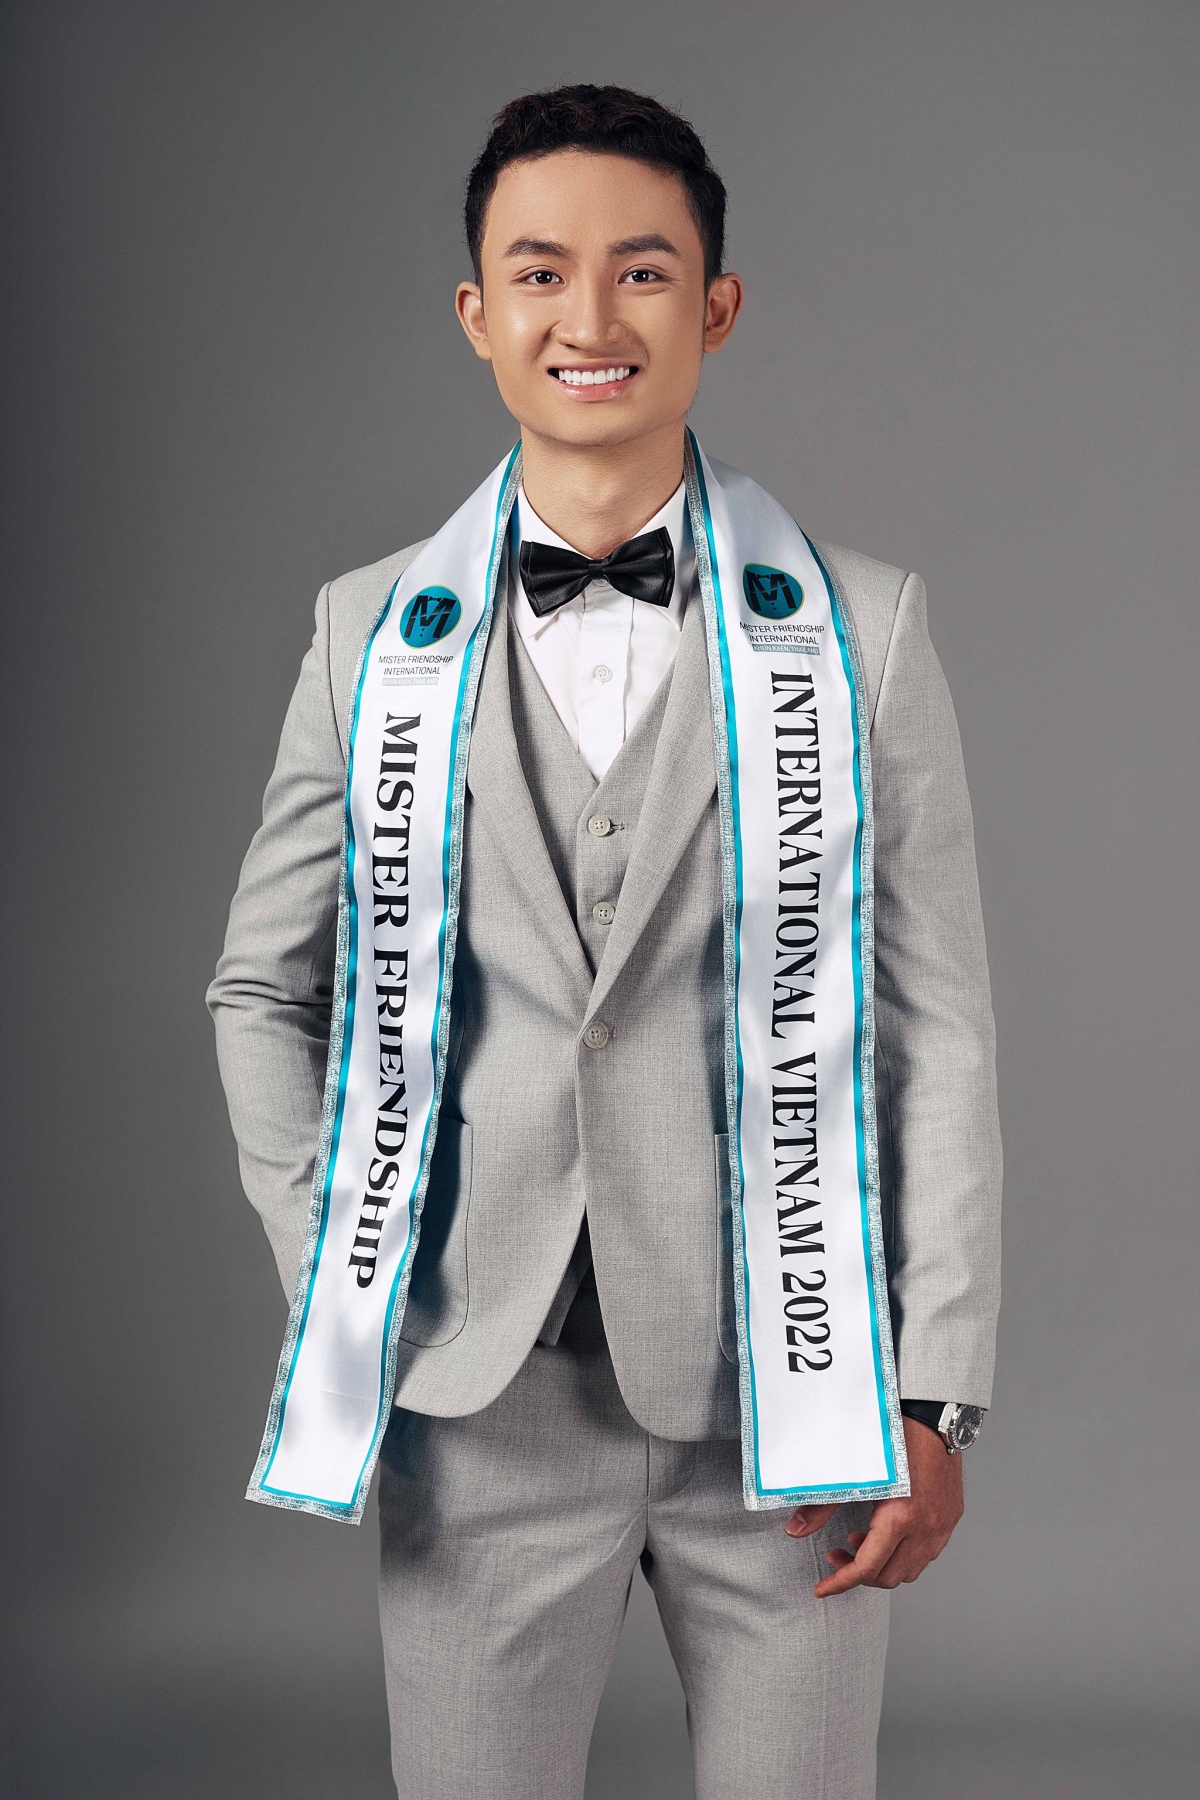 hoang viet an competes at mister friendship 2022 picture 1